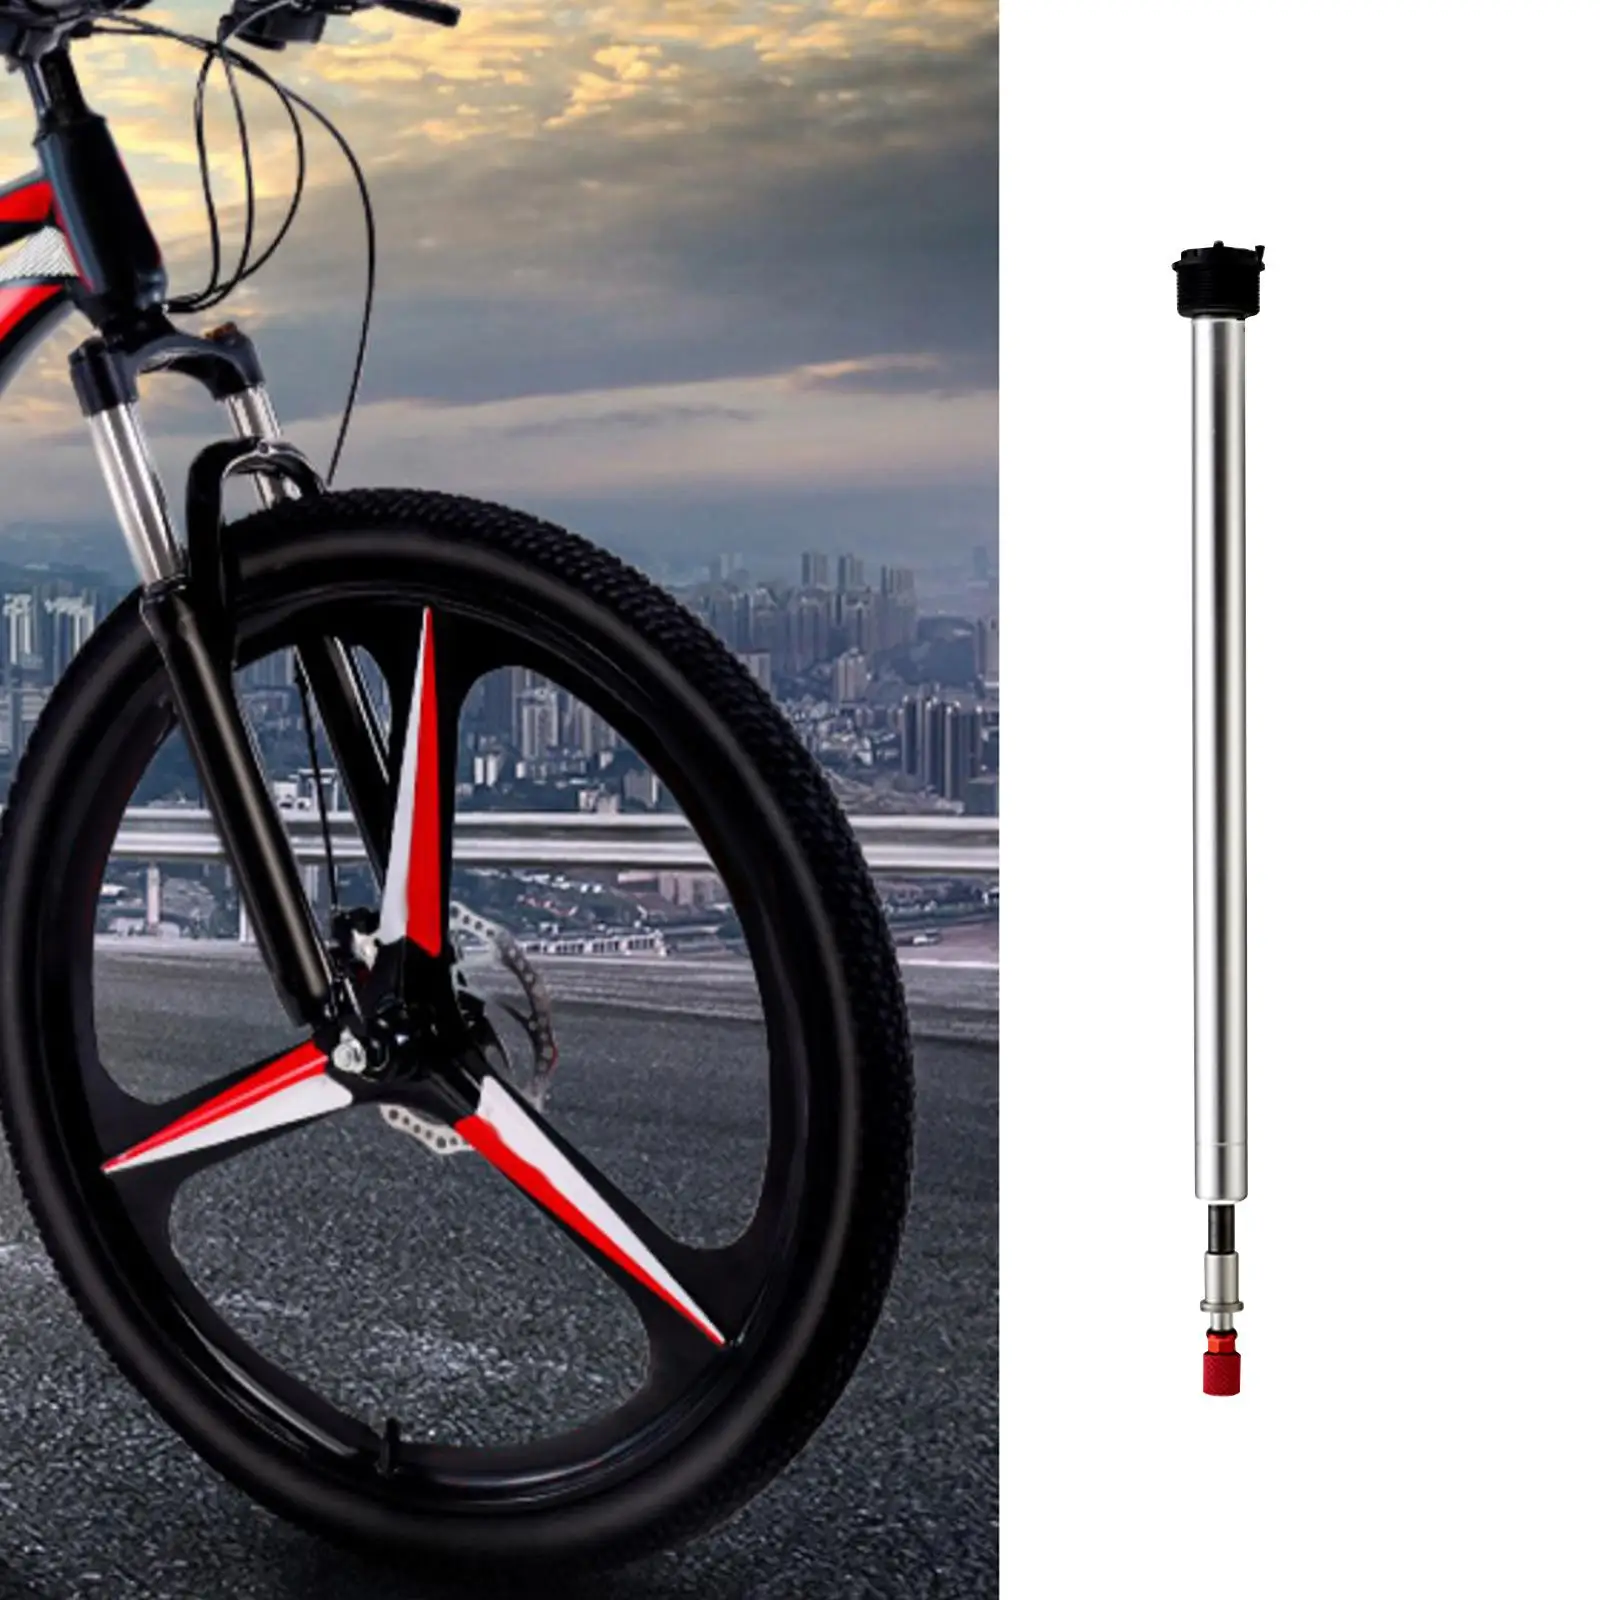 Front Fork Repair Rod, Air Damping Rod, Easy to Install, Bike Suspension Fork